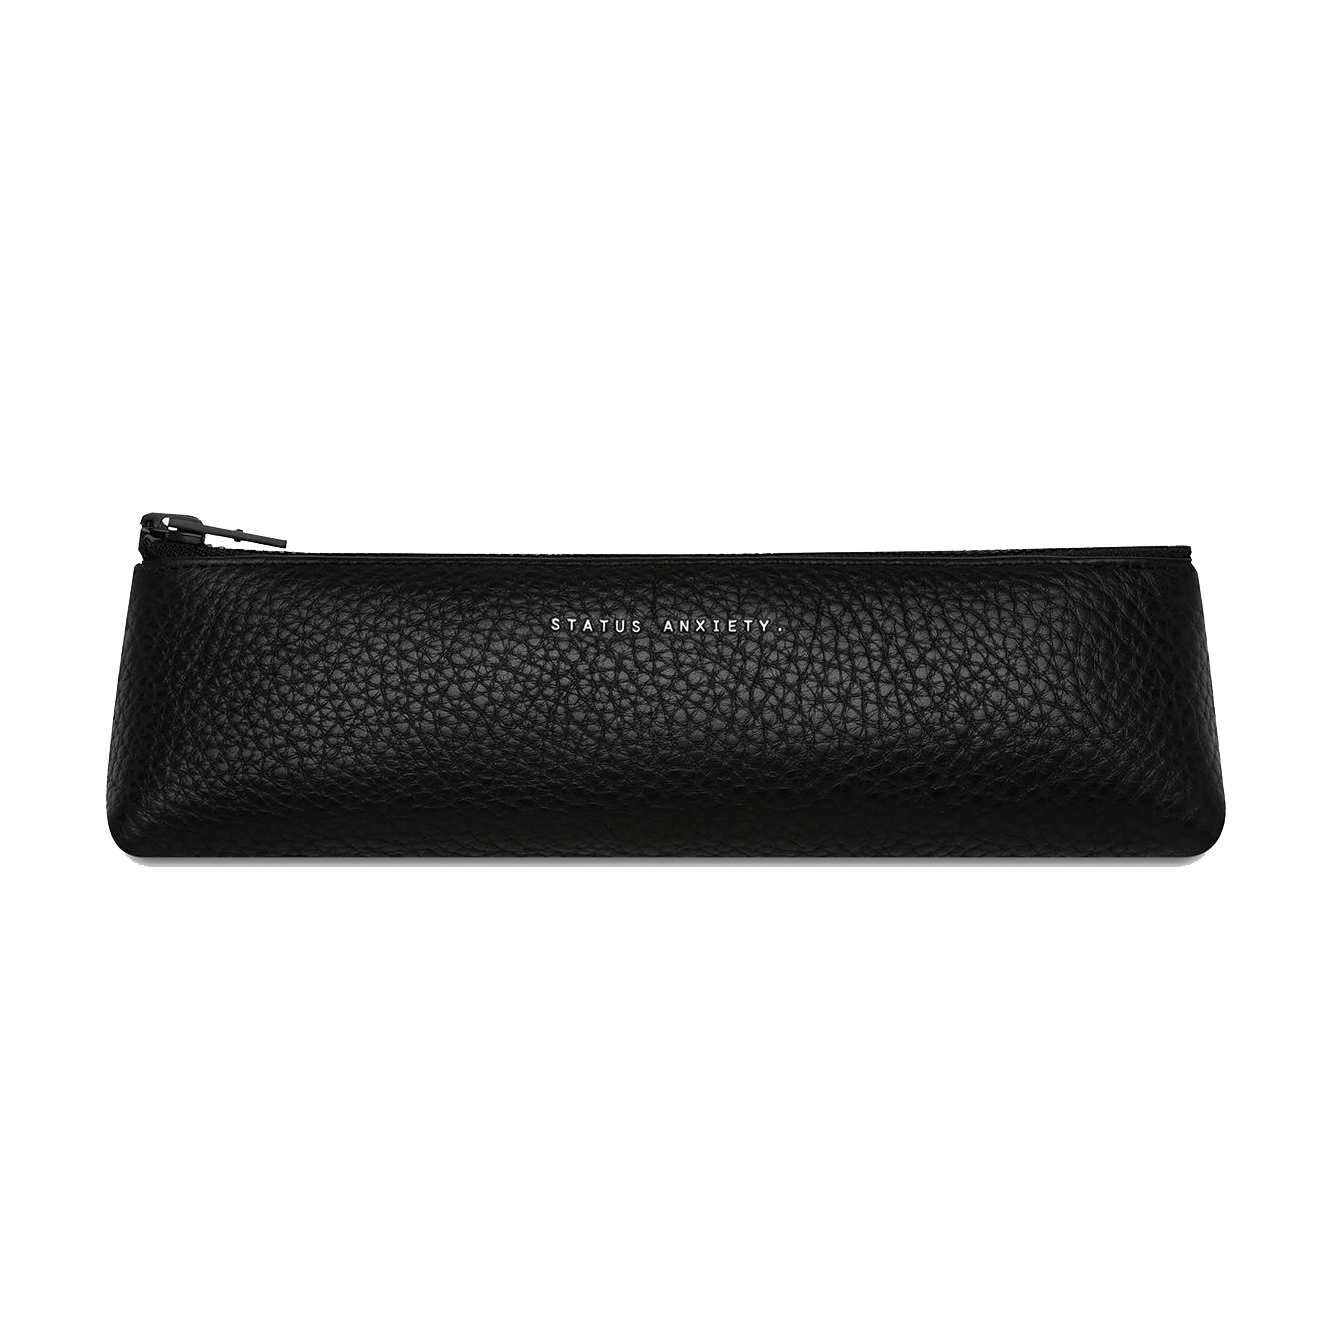 Status Anxiety small leather  makeup case black